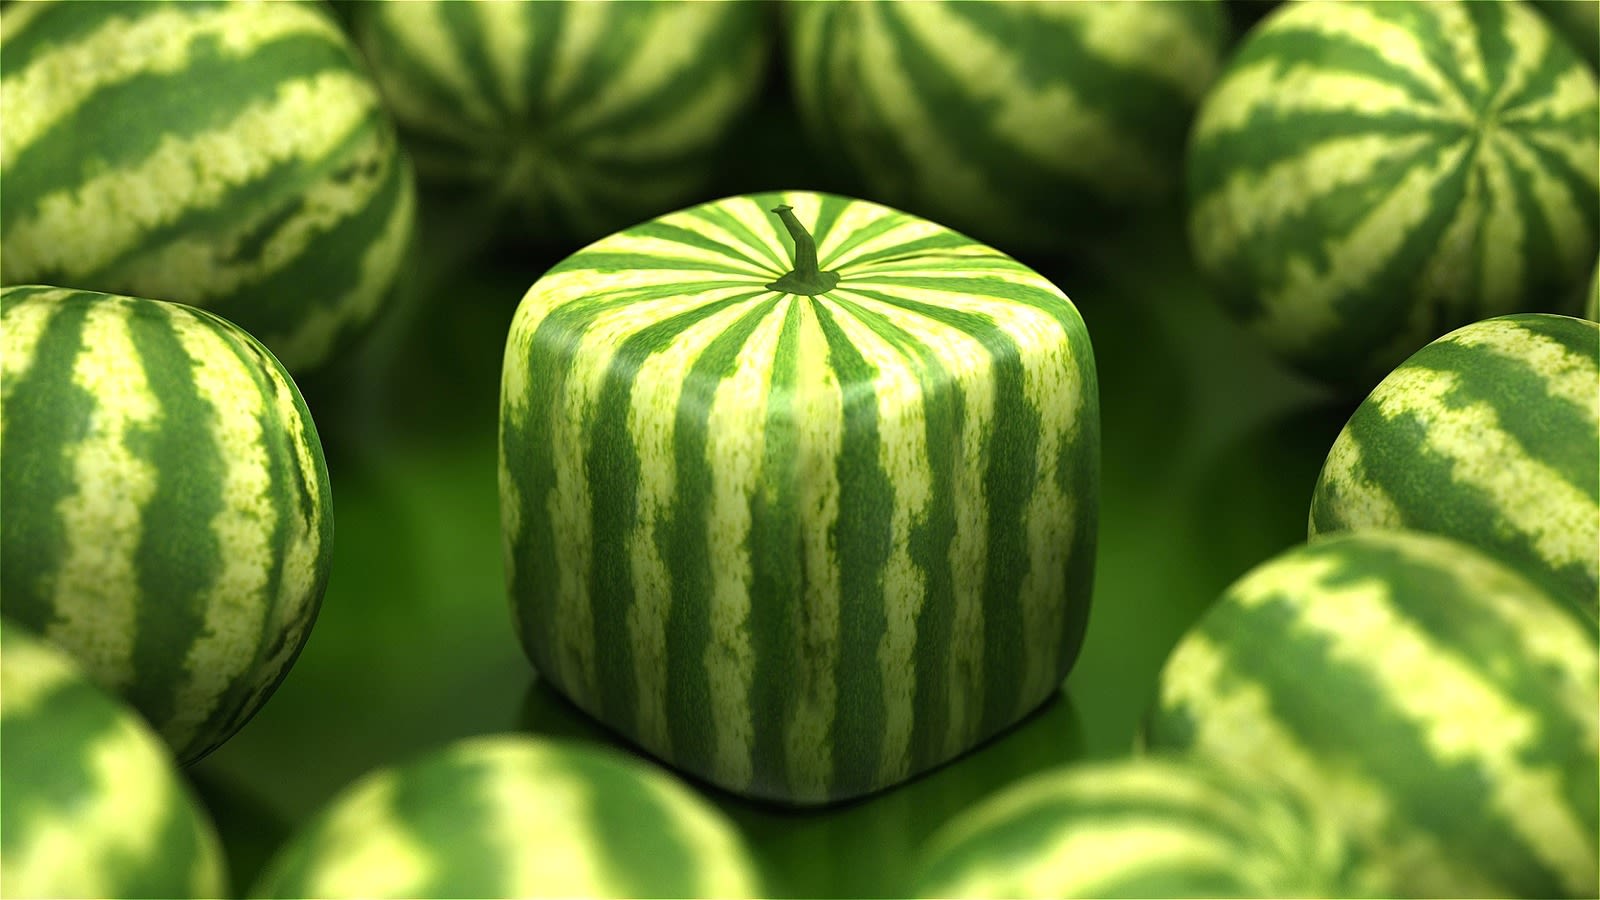 Japan's Wildly Expensive Square Watermelons Aren't Even Edible